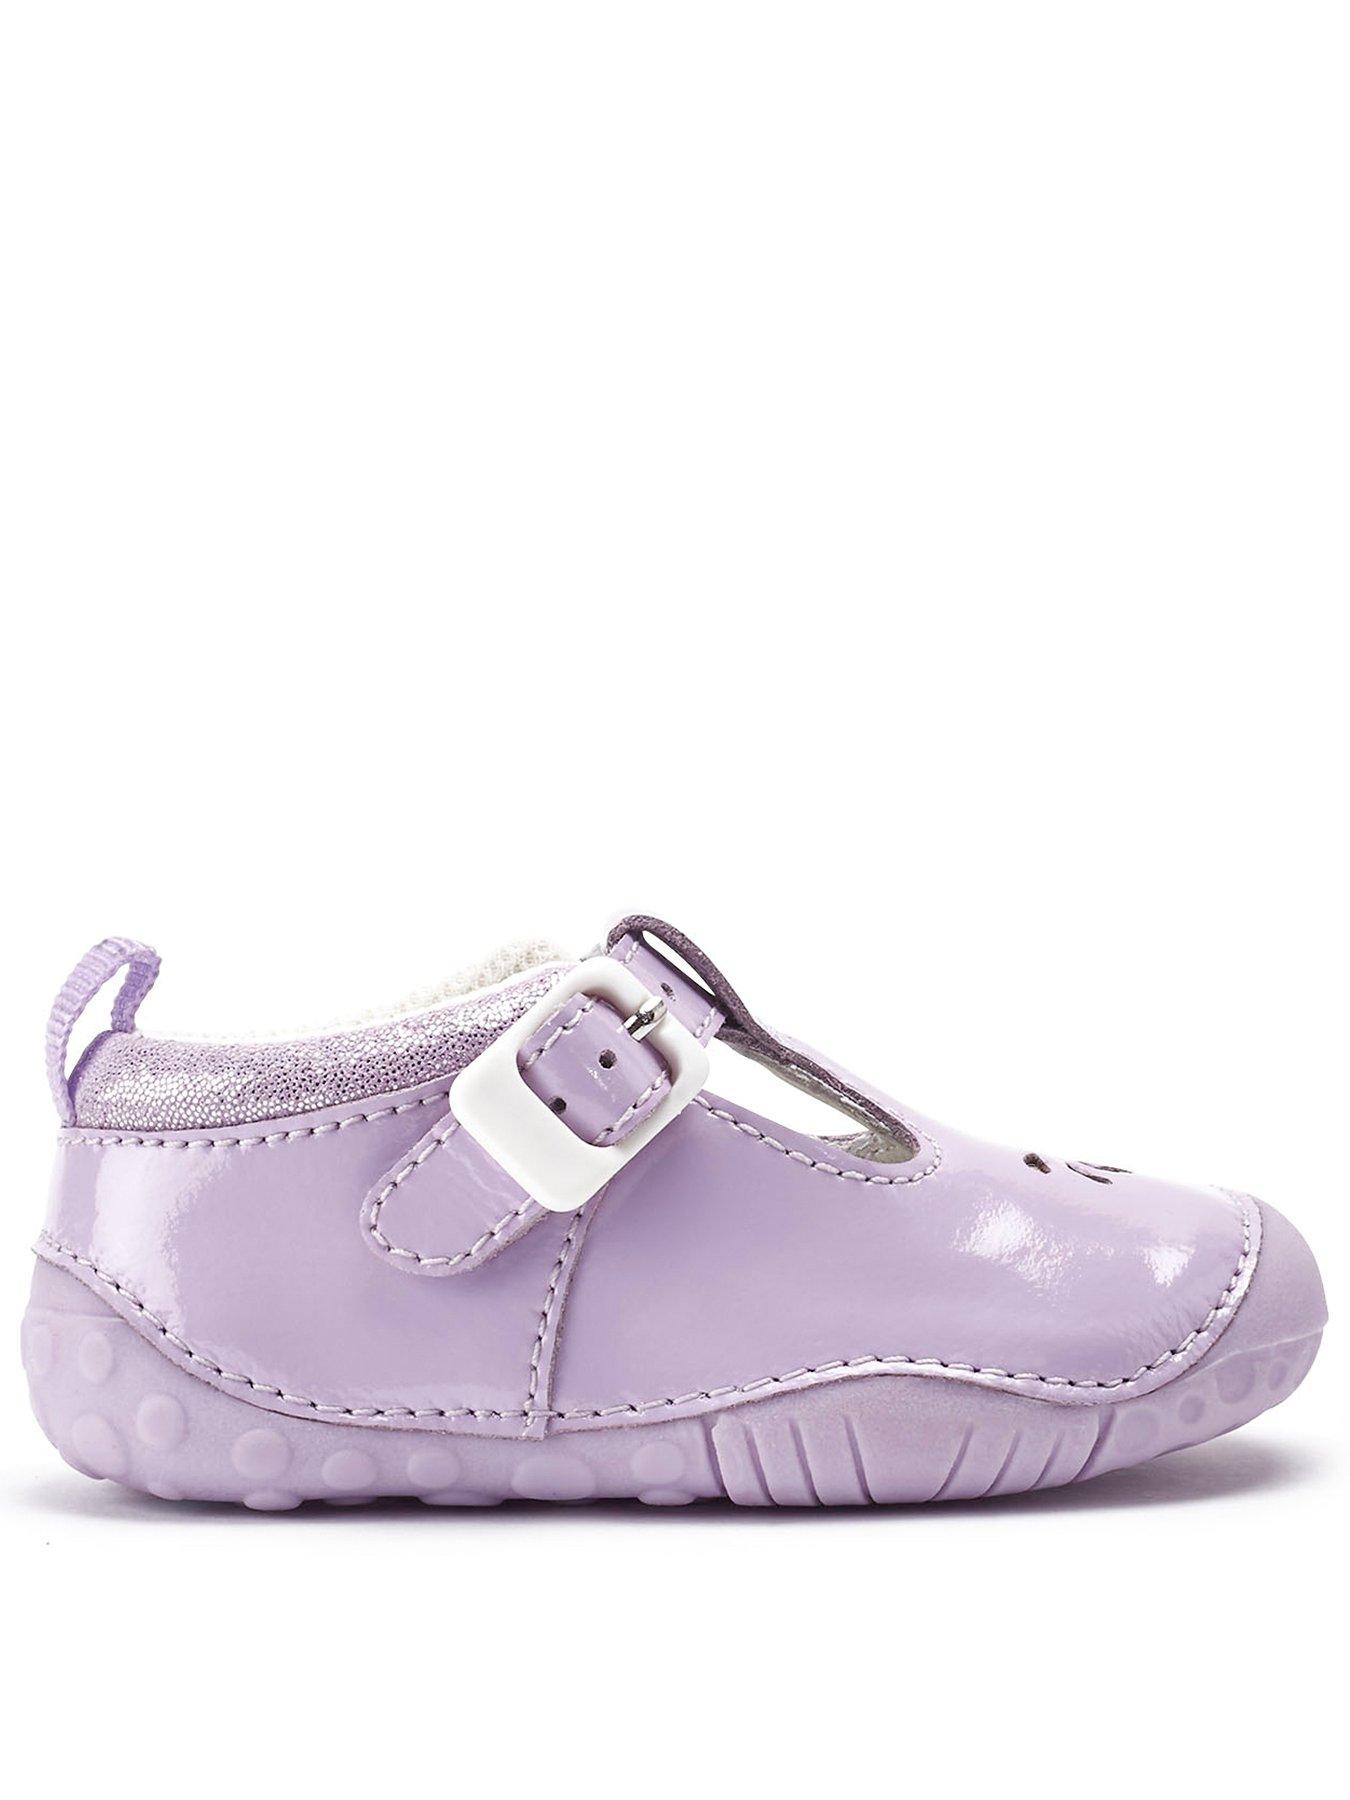 Shoes & boots Startrite Baby Bubble Pre Walkers